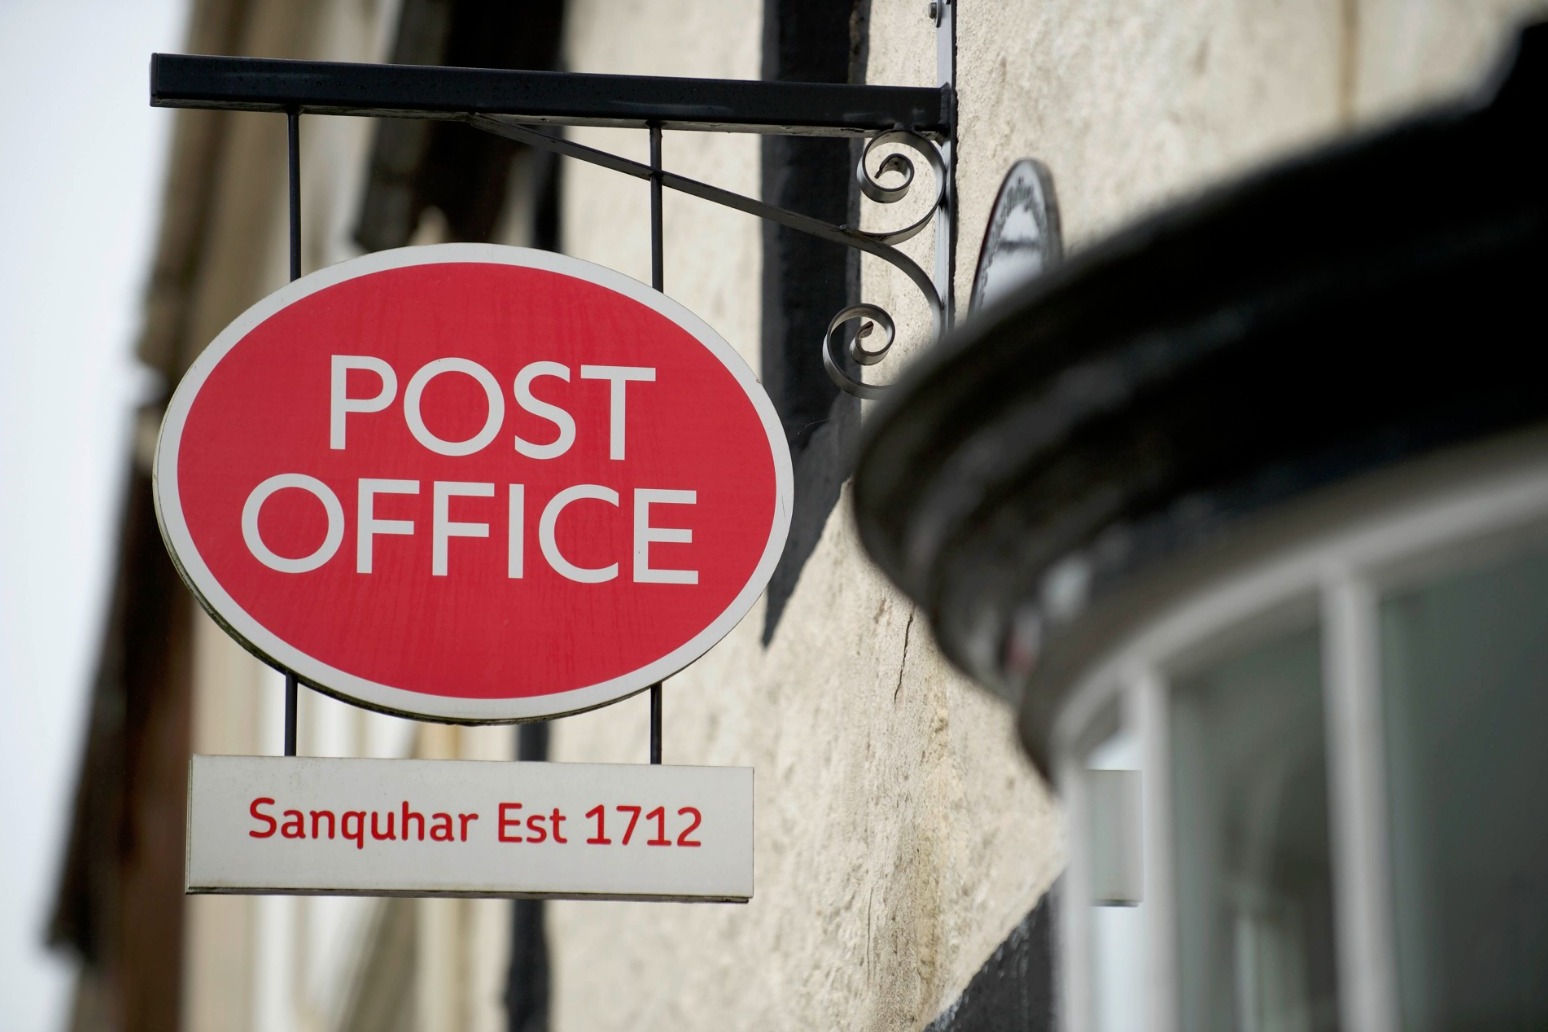 Ministers scramble to speed up the overturning of Post Office convictions 